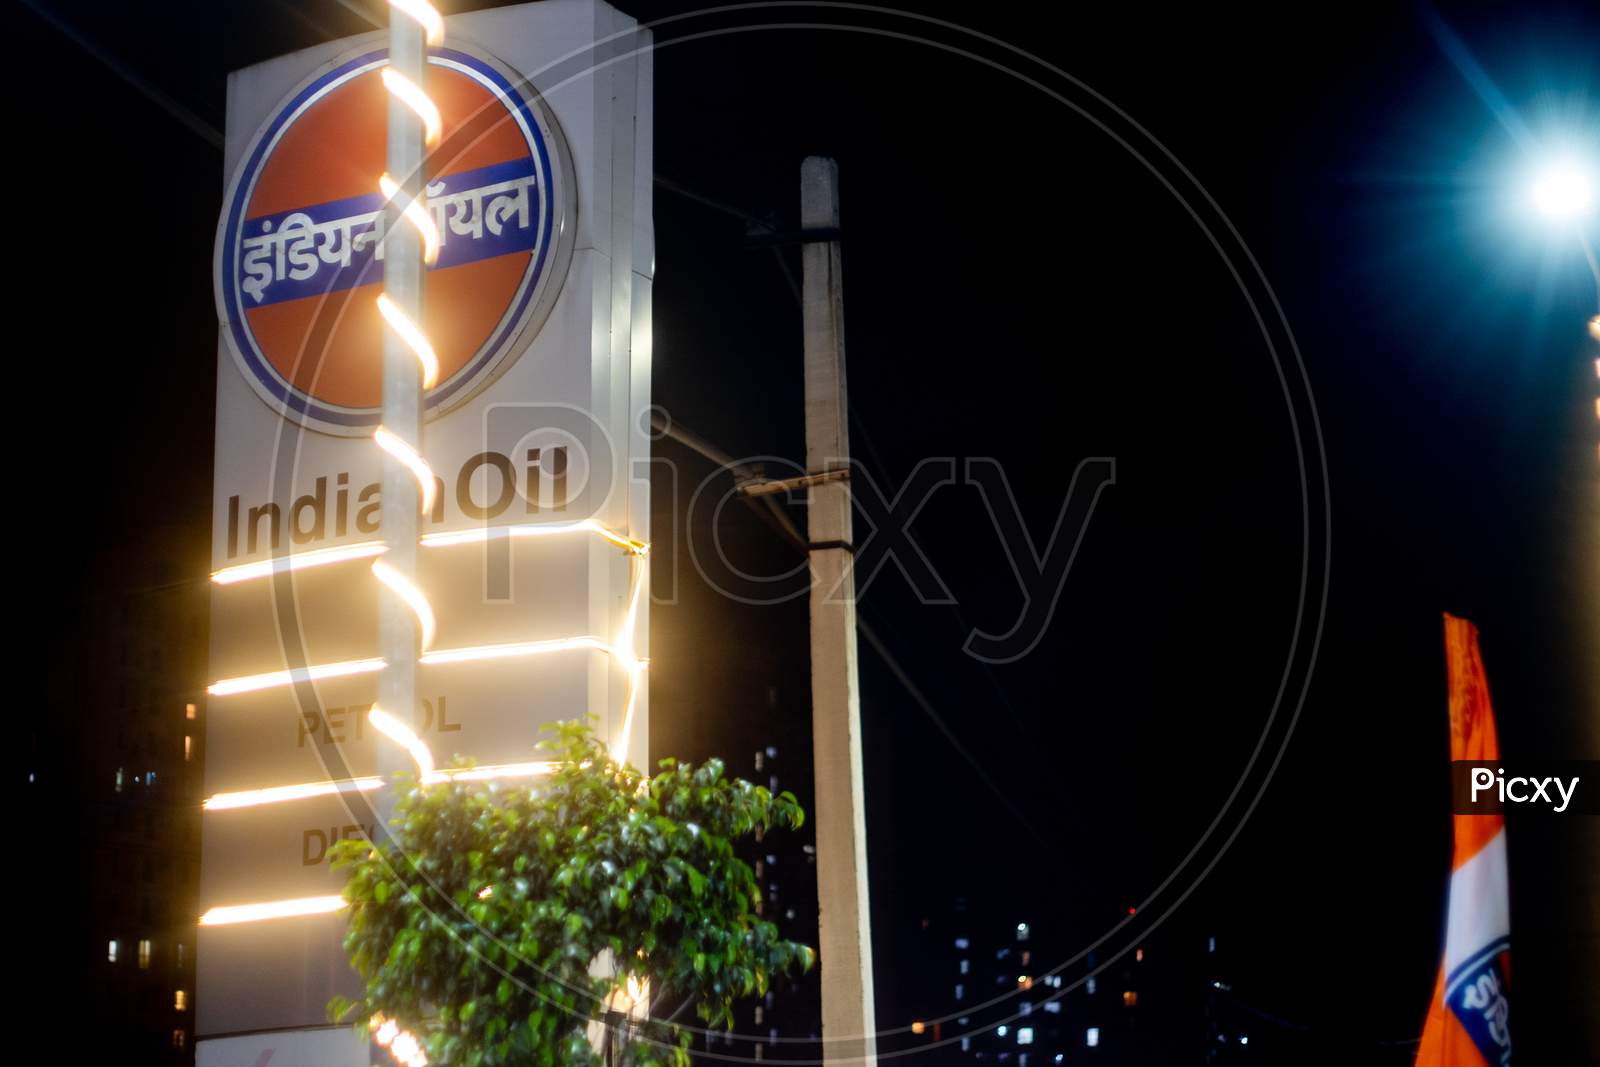 Night Shot Of Indian Oil Petrol Pump Decorated With Lights At Night As Prices Of Petrol Increase To The Highest Ever Prices In India